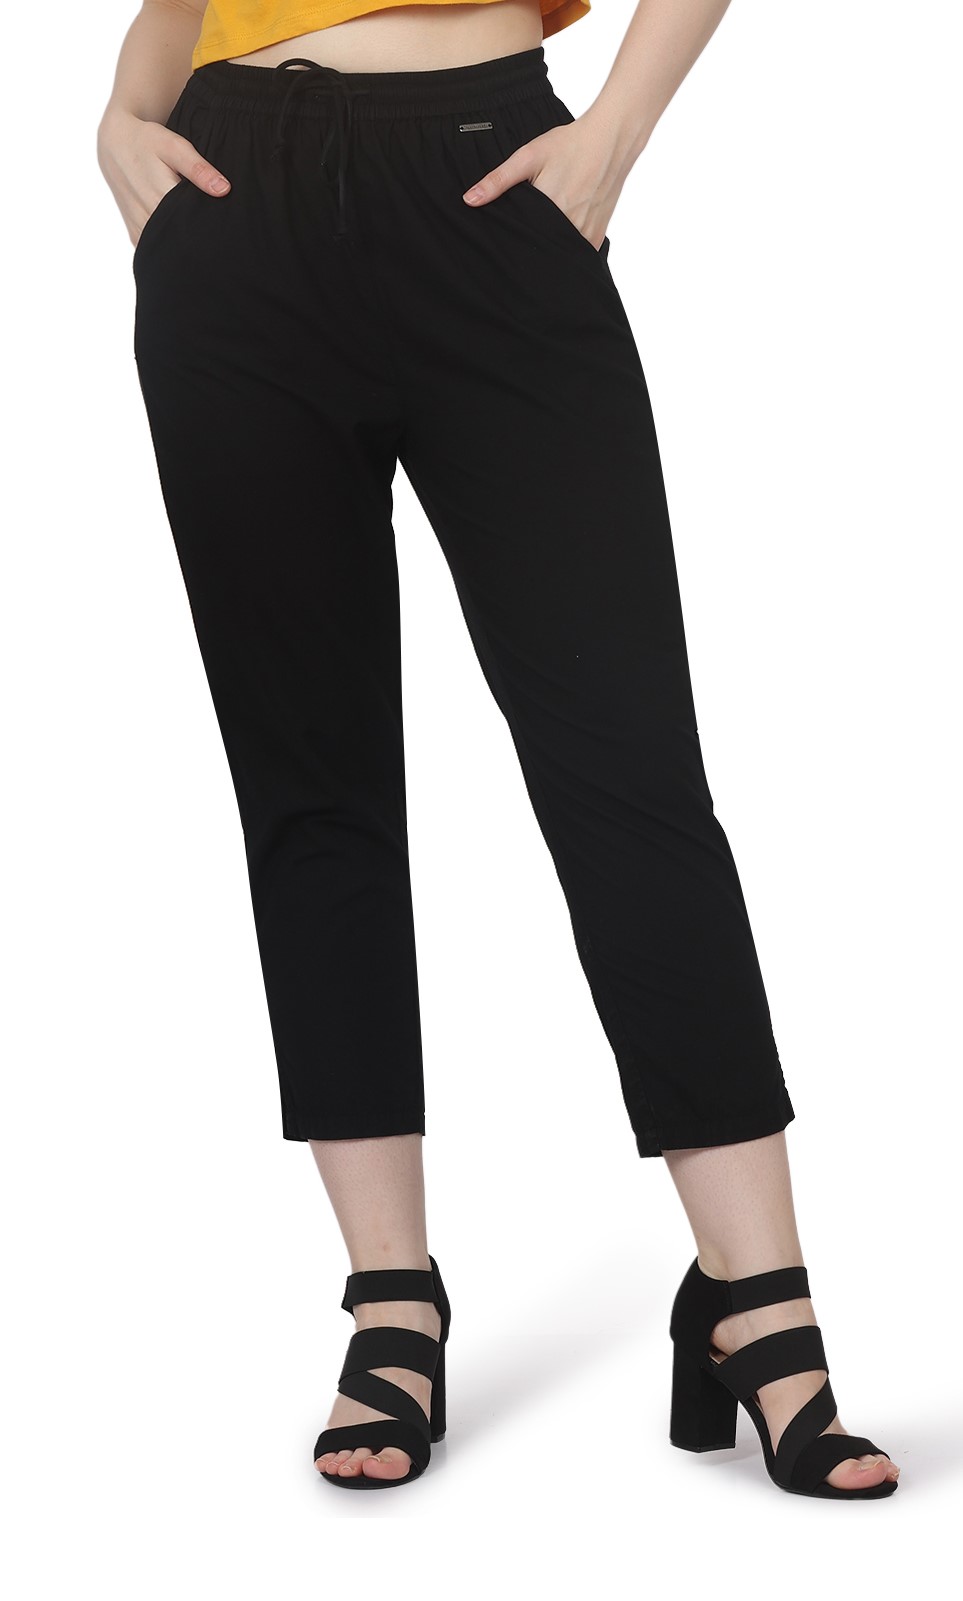 https://frenchtrendz.com/images/thumbs/0007672_frenchtrendz-womens-cotton-pant-elastic-closure-with-drawstring.jpeg